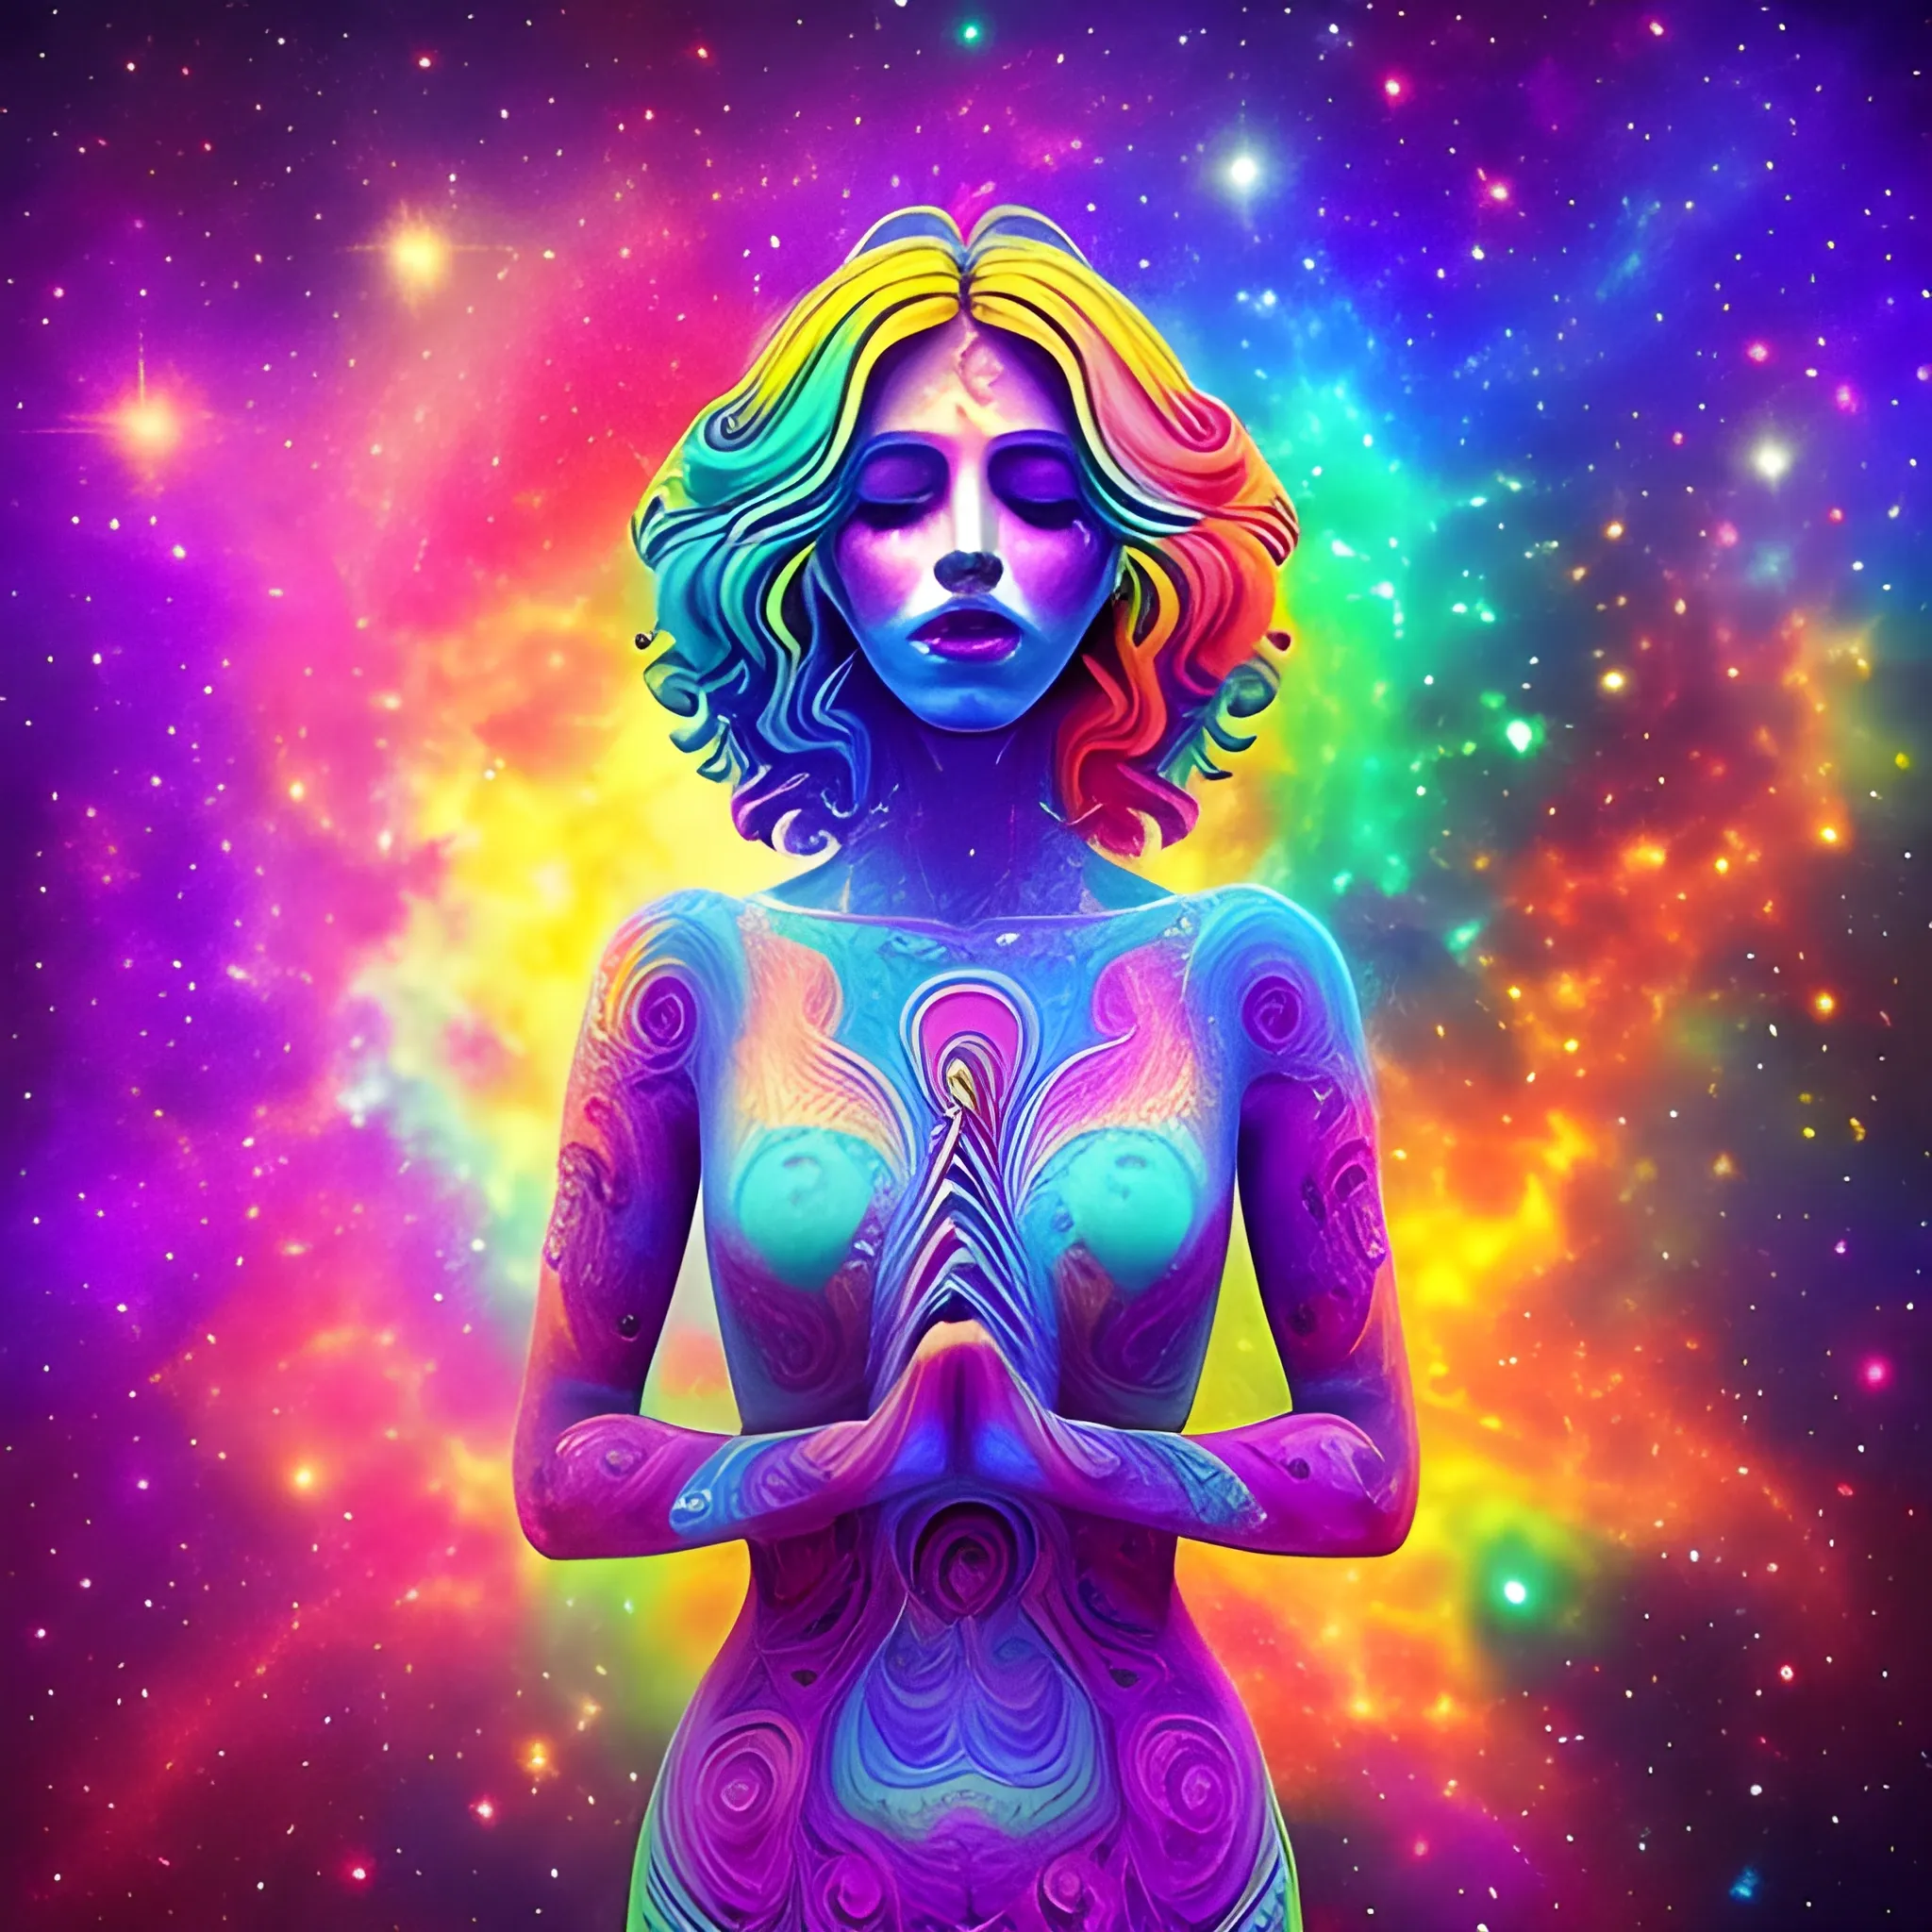 Trippy, serenity, women
, music, colorful, universe
